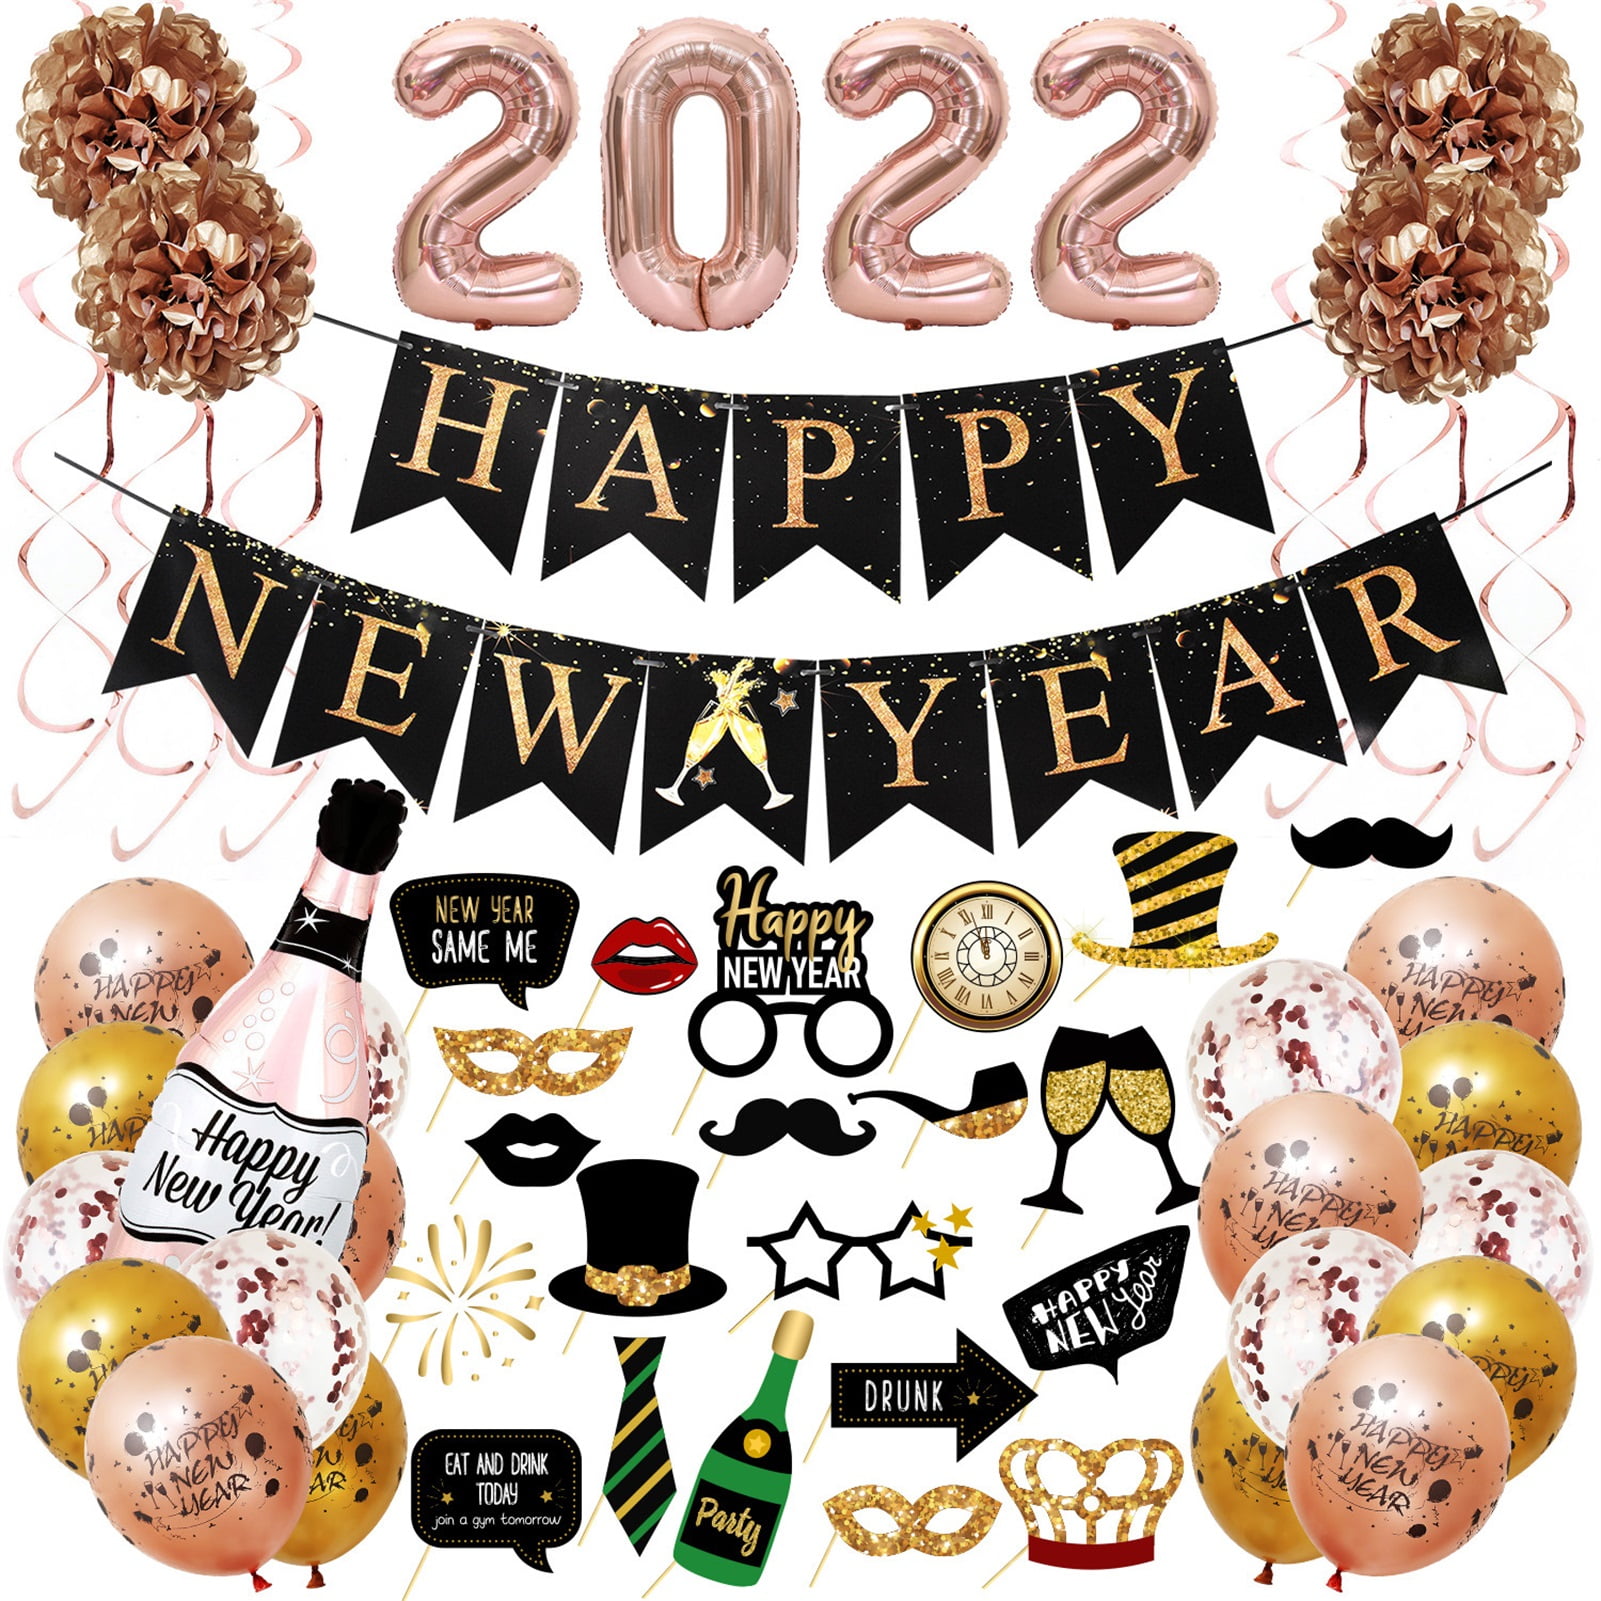 Happy New Year Banner New Years Eve Party Supplies 2022 Happy New Year Balloons Decorations Kit New Years Eve Decorations Happy New Year Balloons Decorations Set with 32 Inch Number 2022 Balloons 